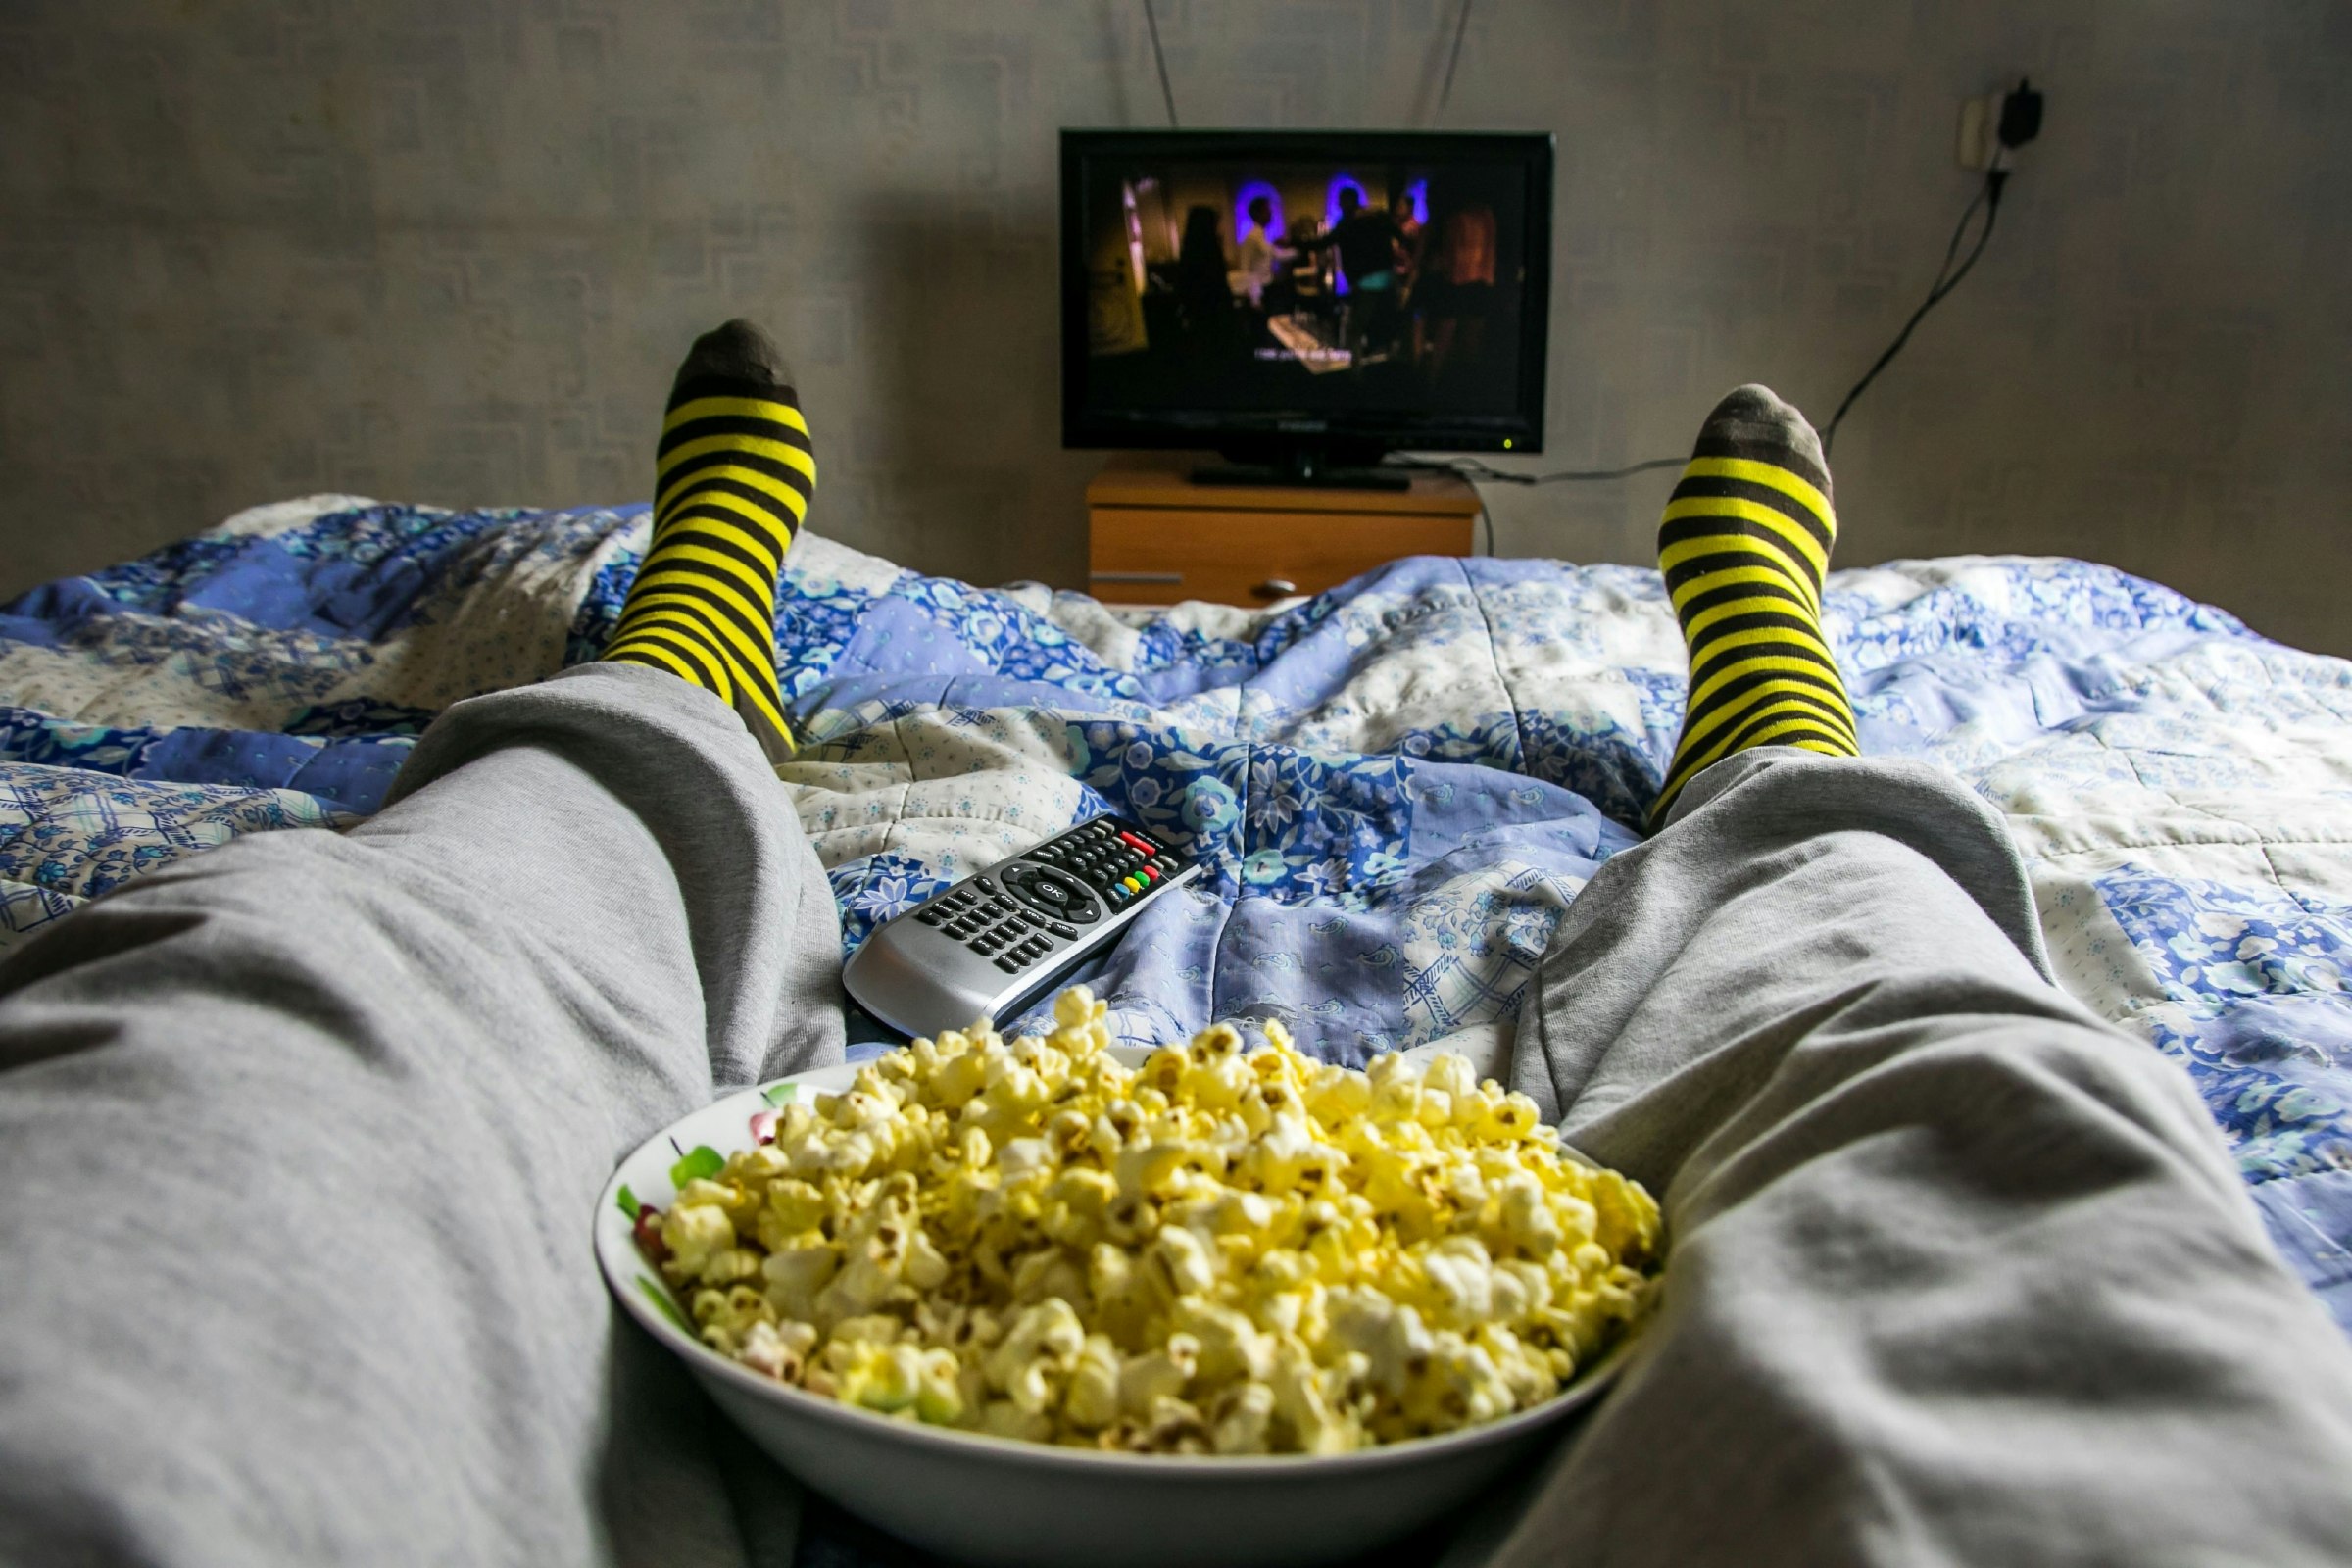 A person's point of view of watching TV while sitting on a bed, popcorn and remote in front of them.